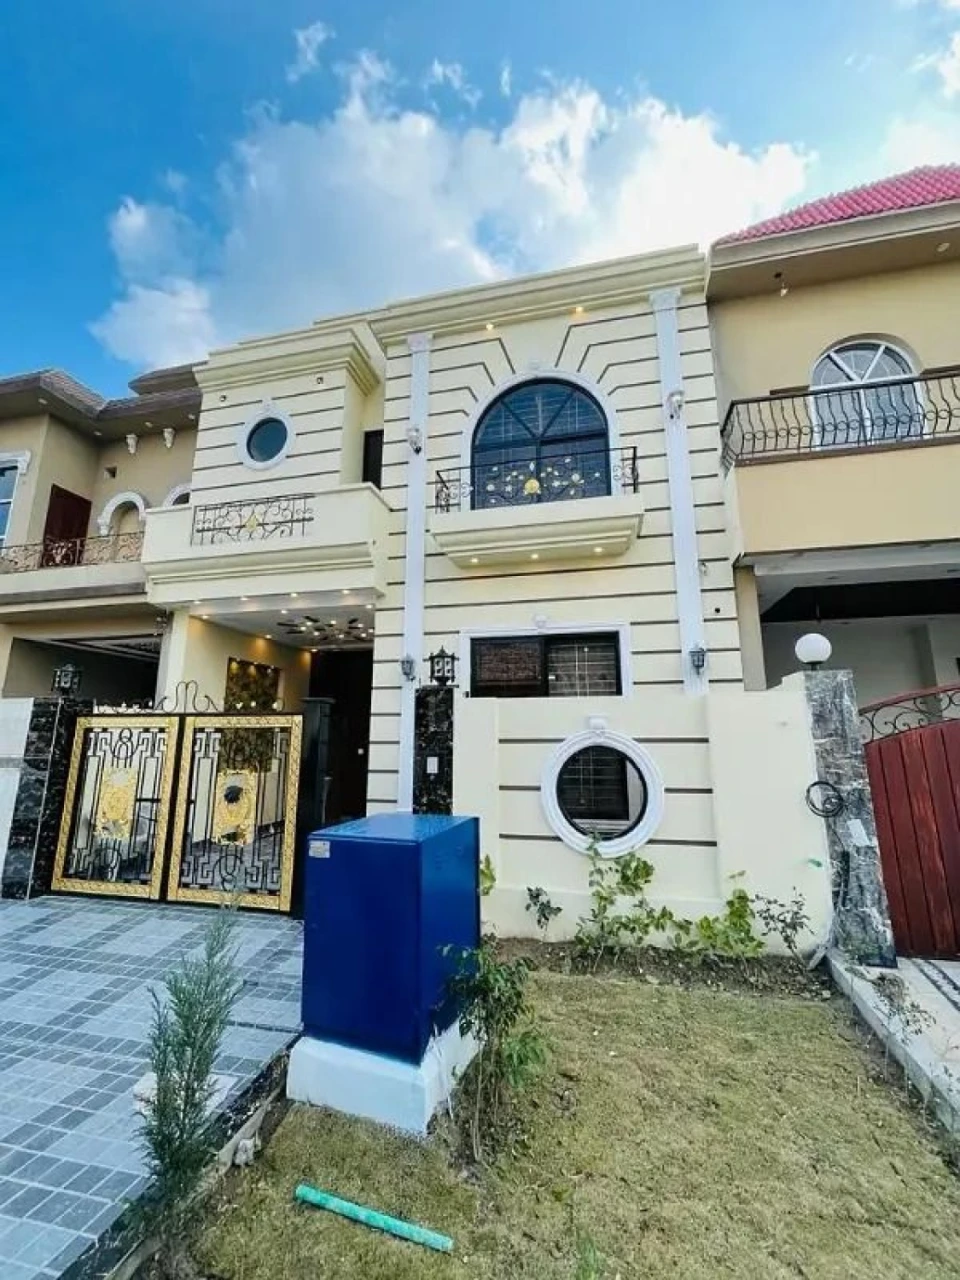 House for sale in citi housing society